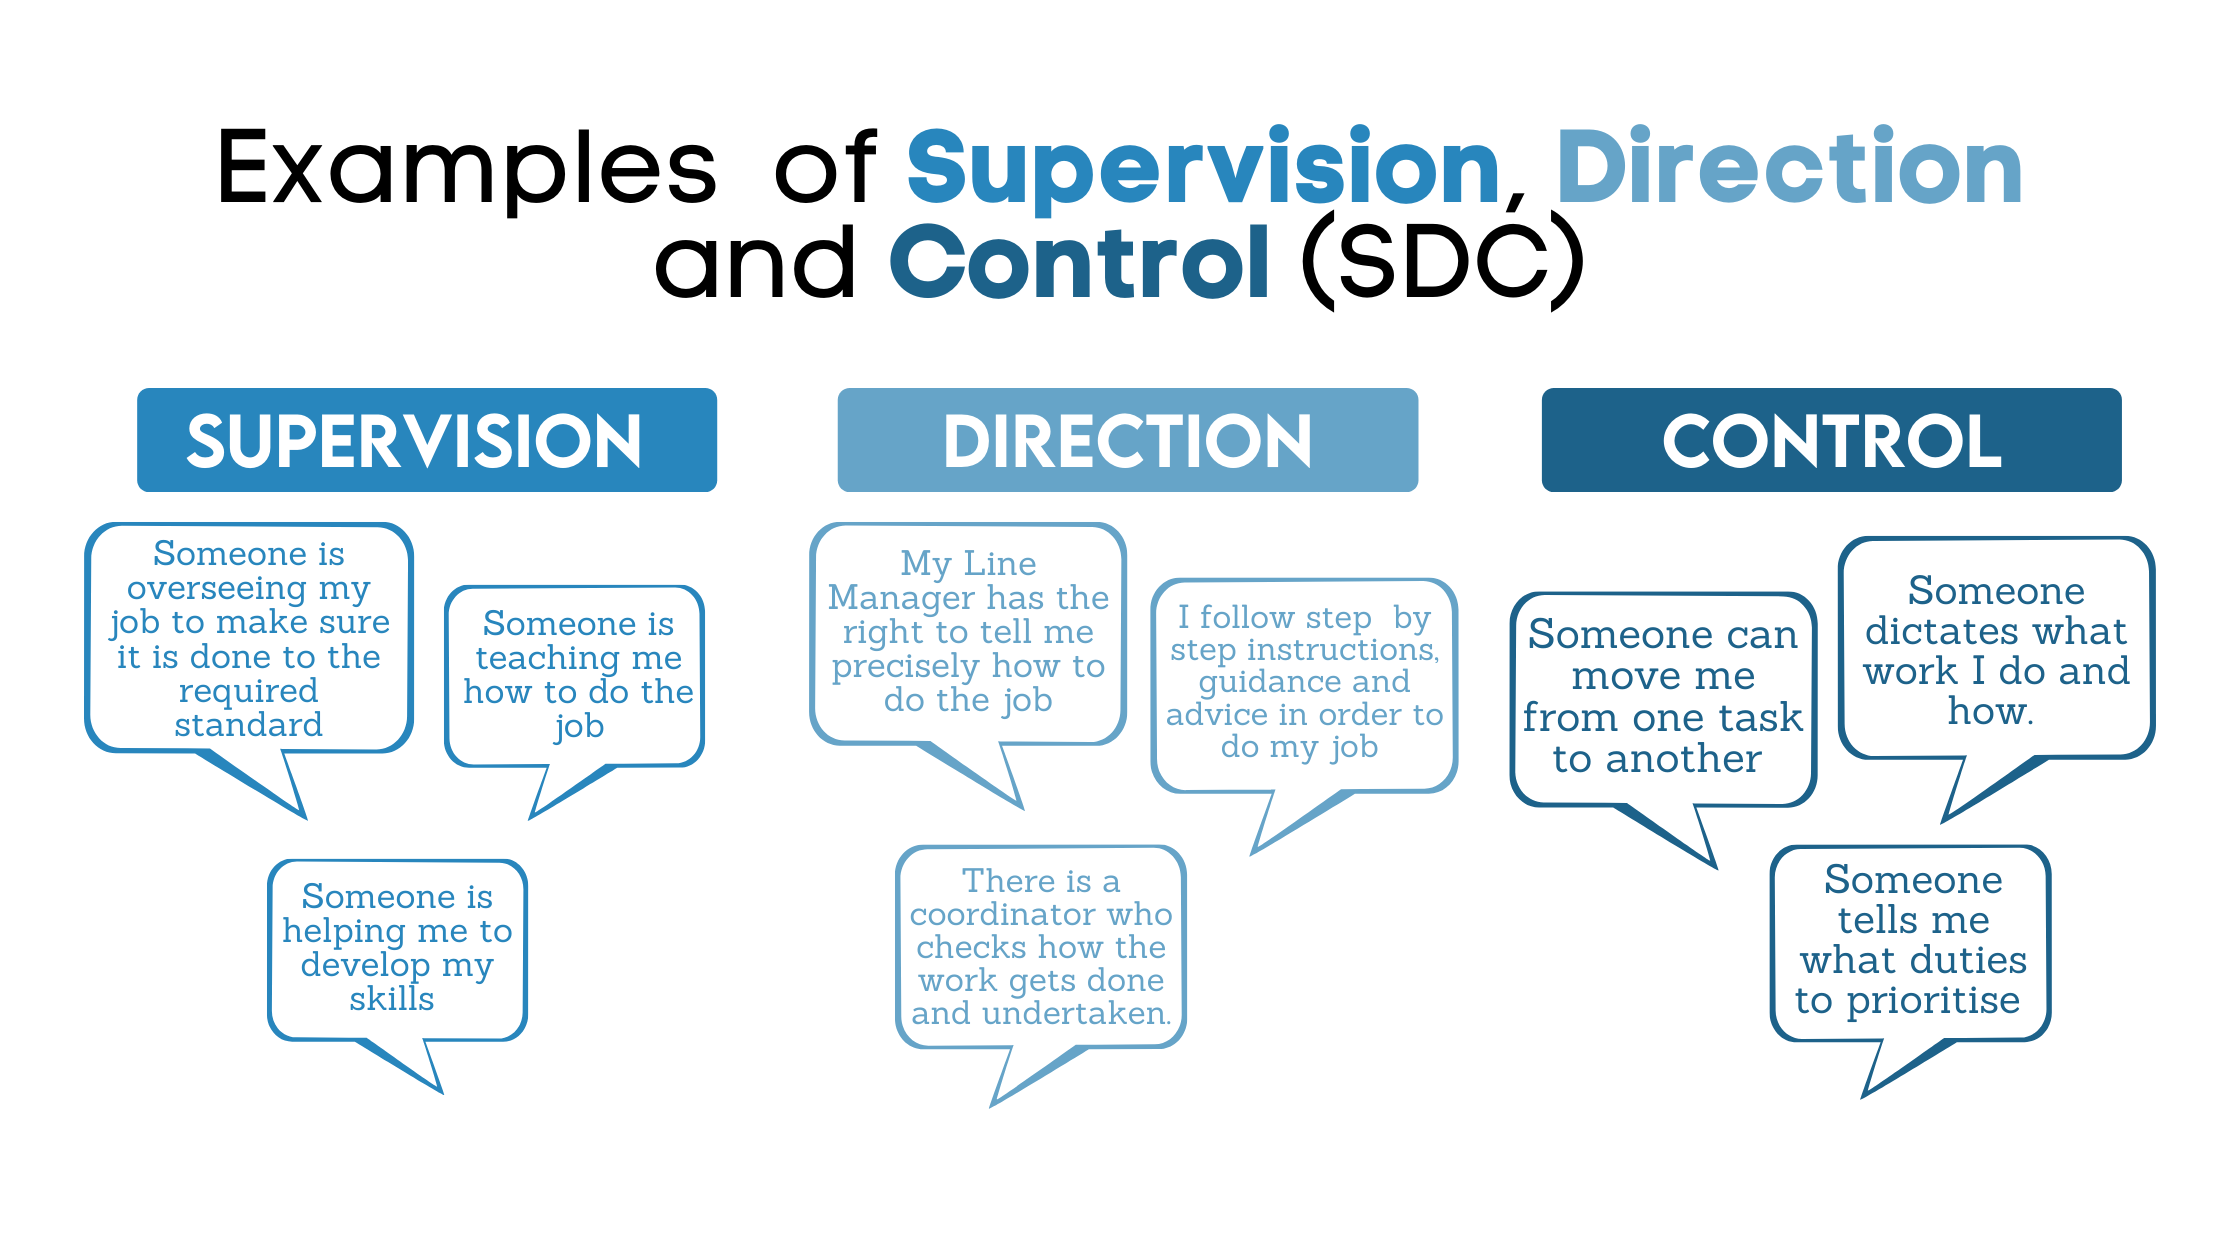 Examples of what Supervision, Direction or Control could be